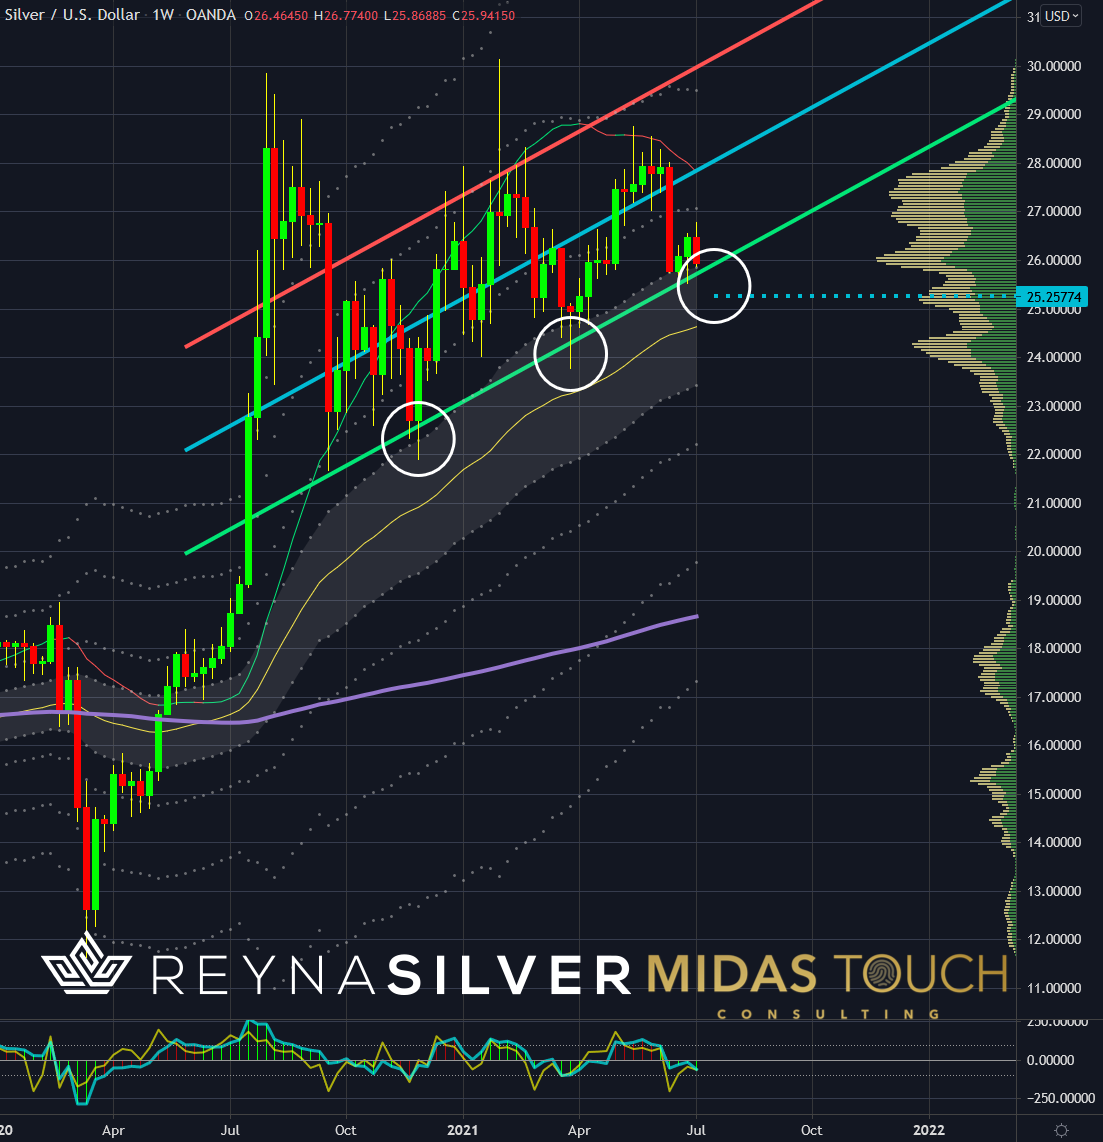 Silver in US-Dollar, weekly chart as of July 8th, 2021.